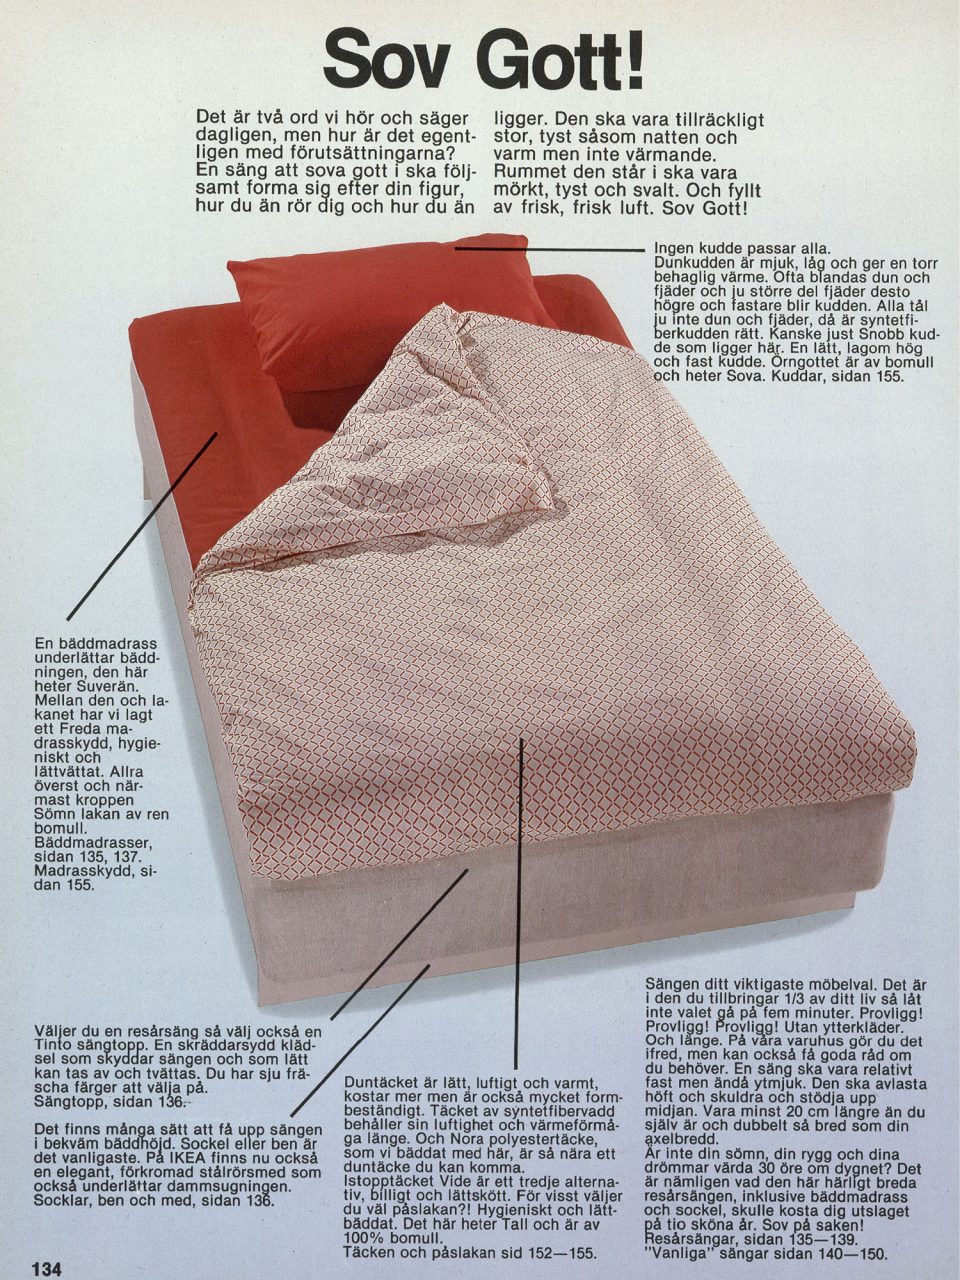 1979 IKEA catalogue page with a bed made with red pillowcases and bed sheet, and red-white patterned TALL duvet cover.